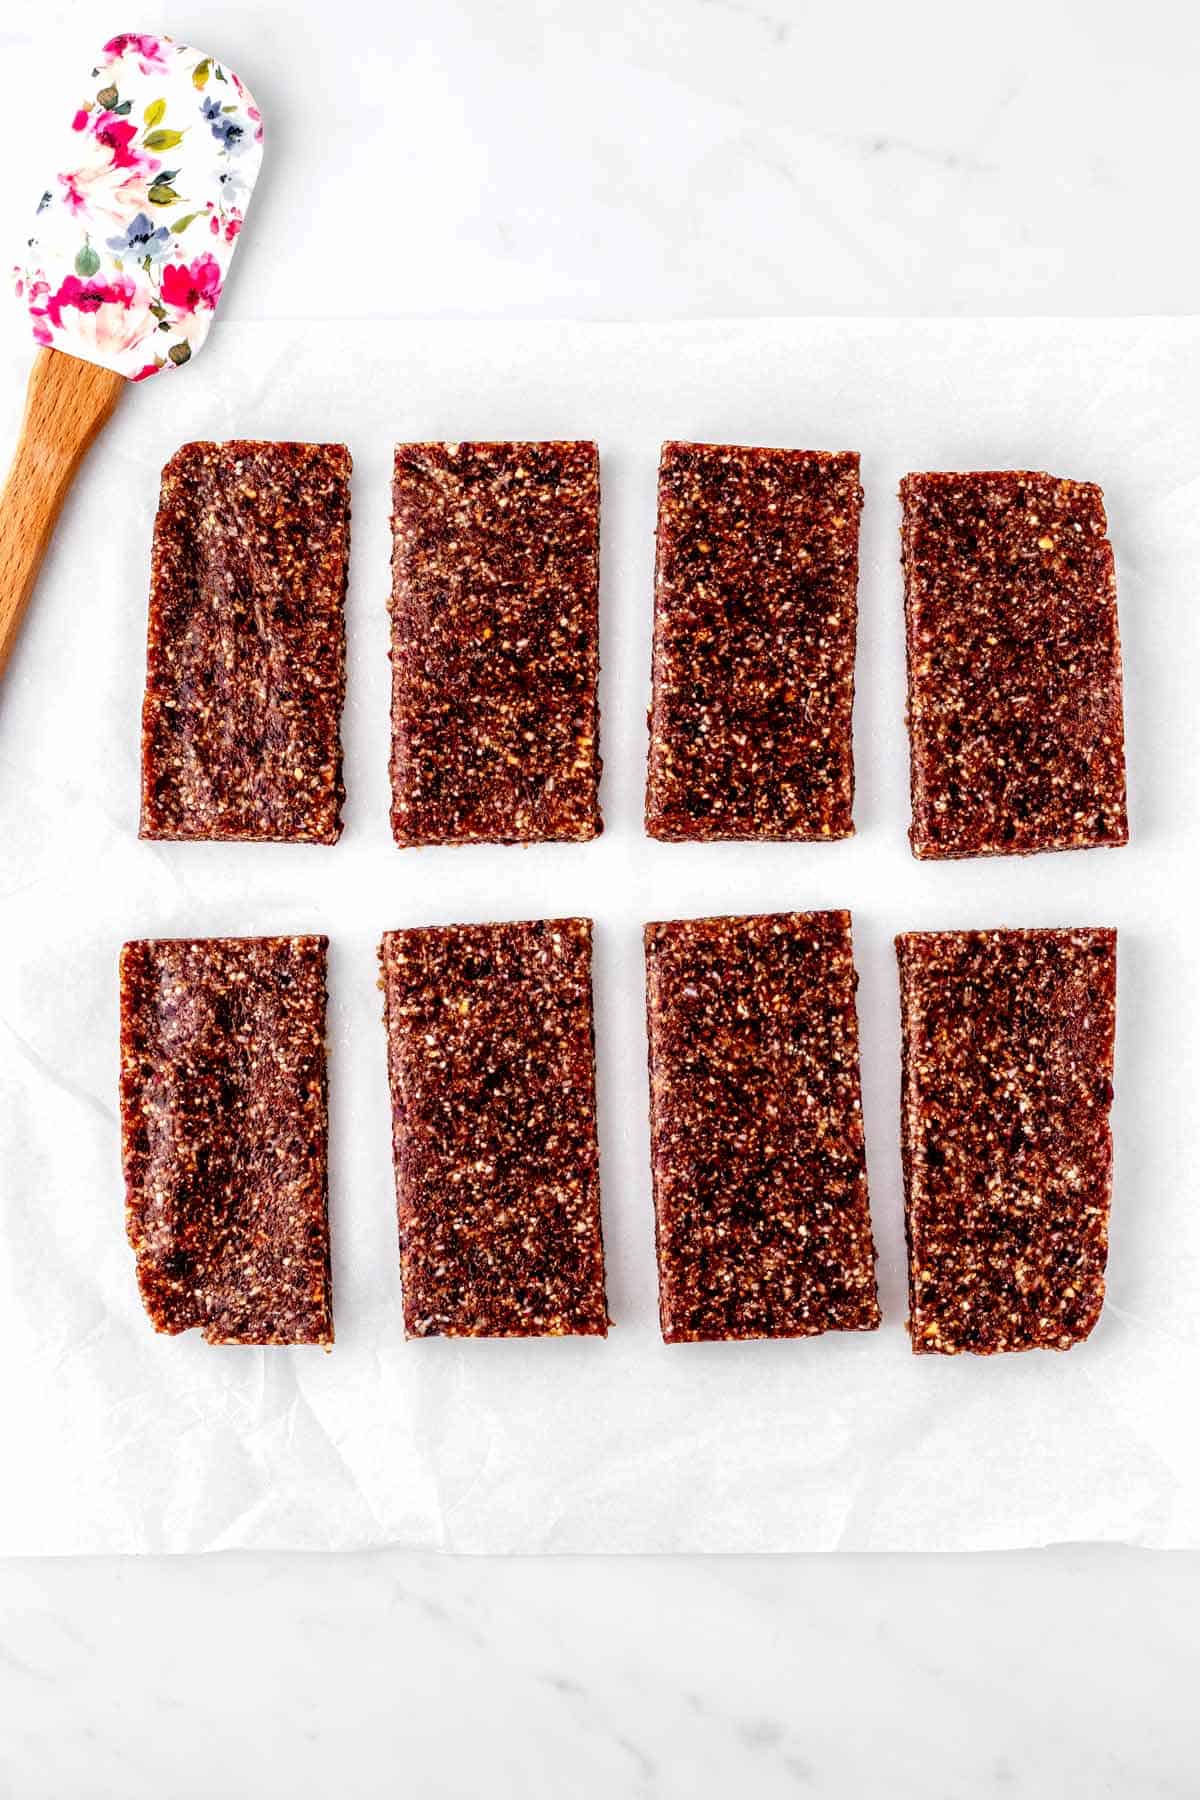 Pressed fruit bars cut into eight bars.